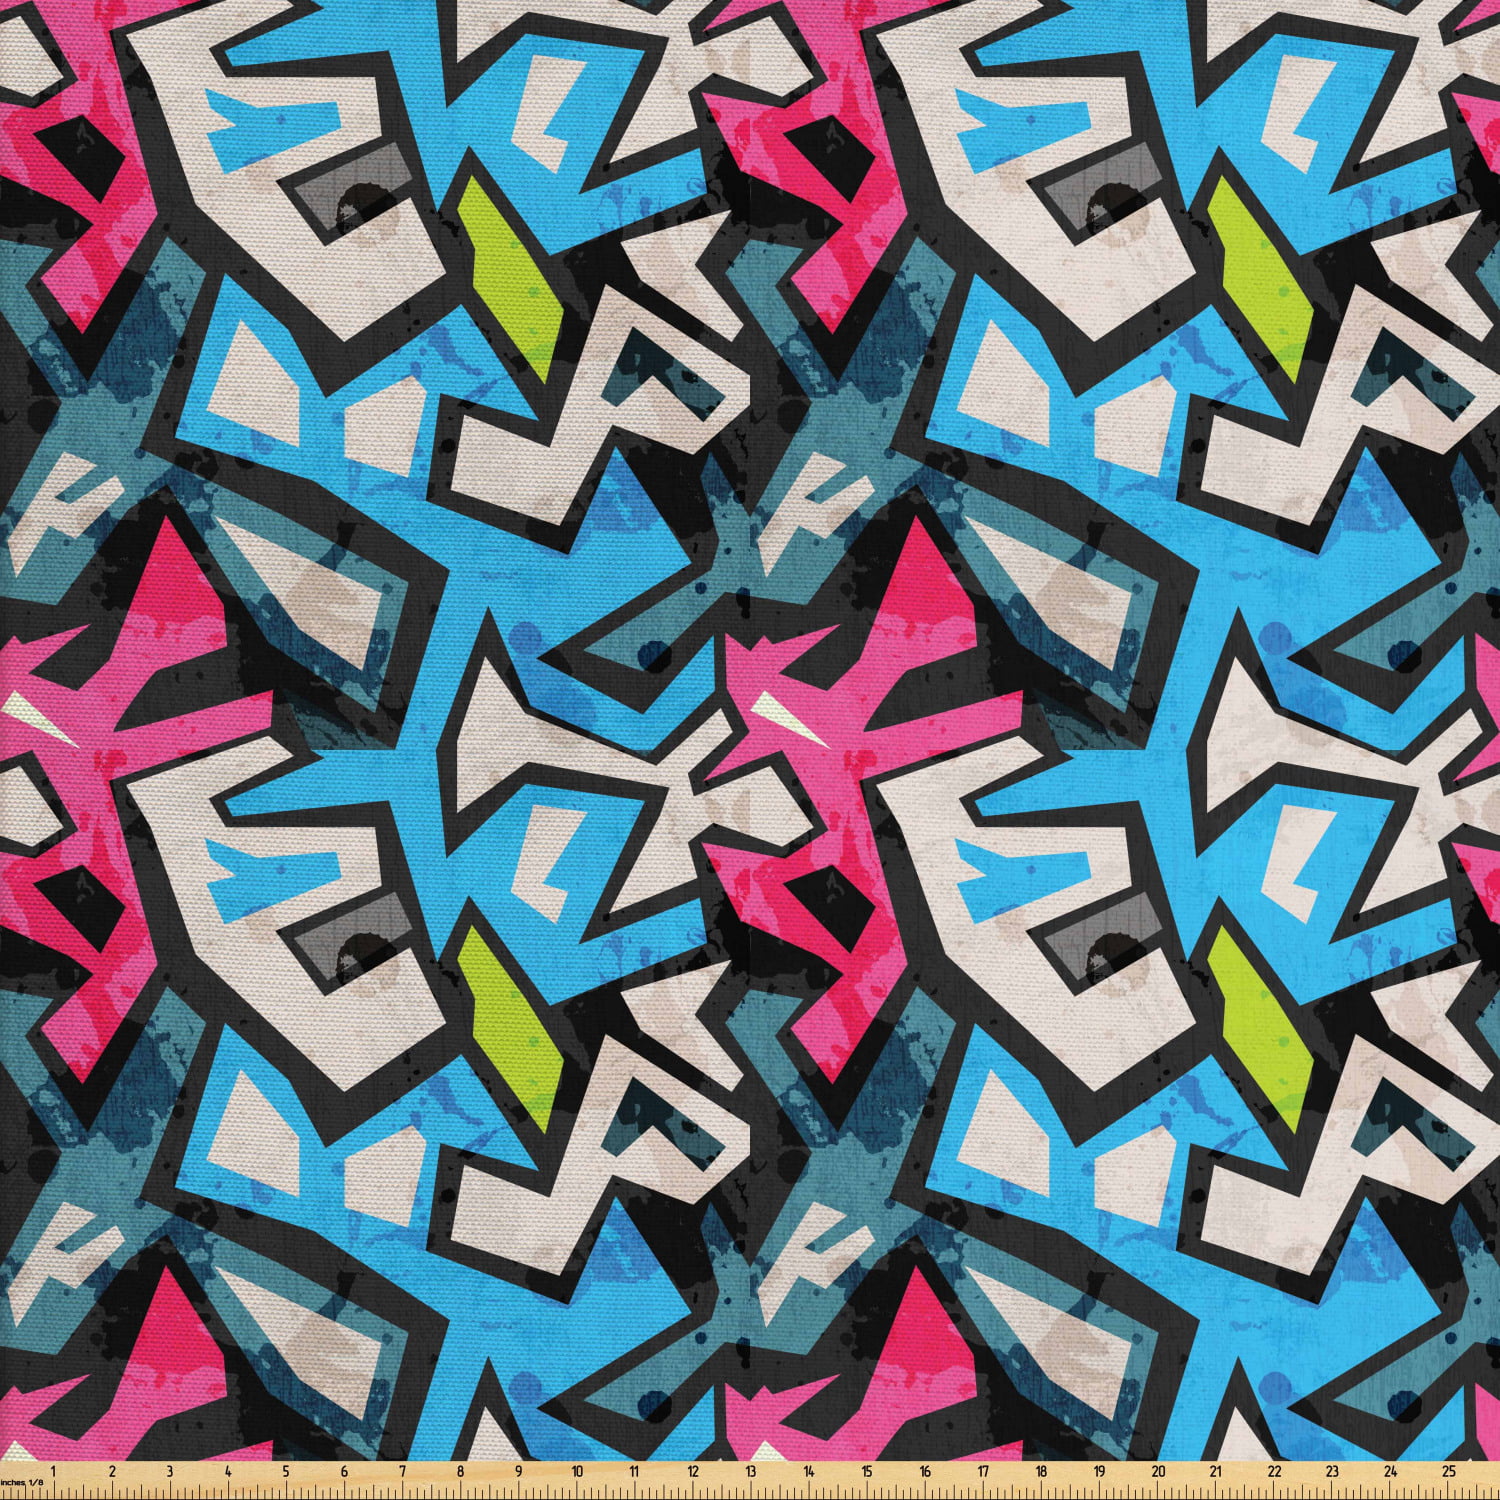 Grunge Fabric By The Yard Street Art Theme With Colorful Graffiti Funky Display Underground